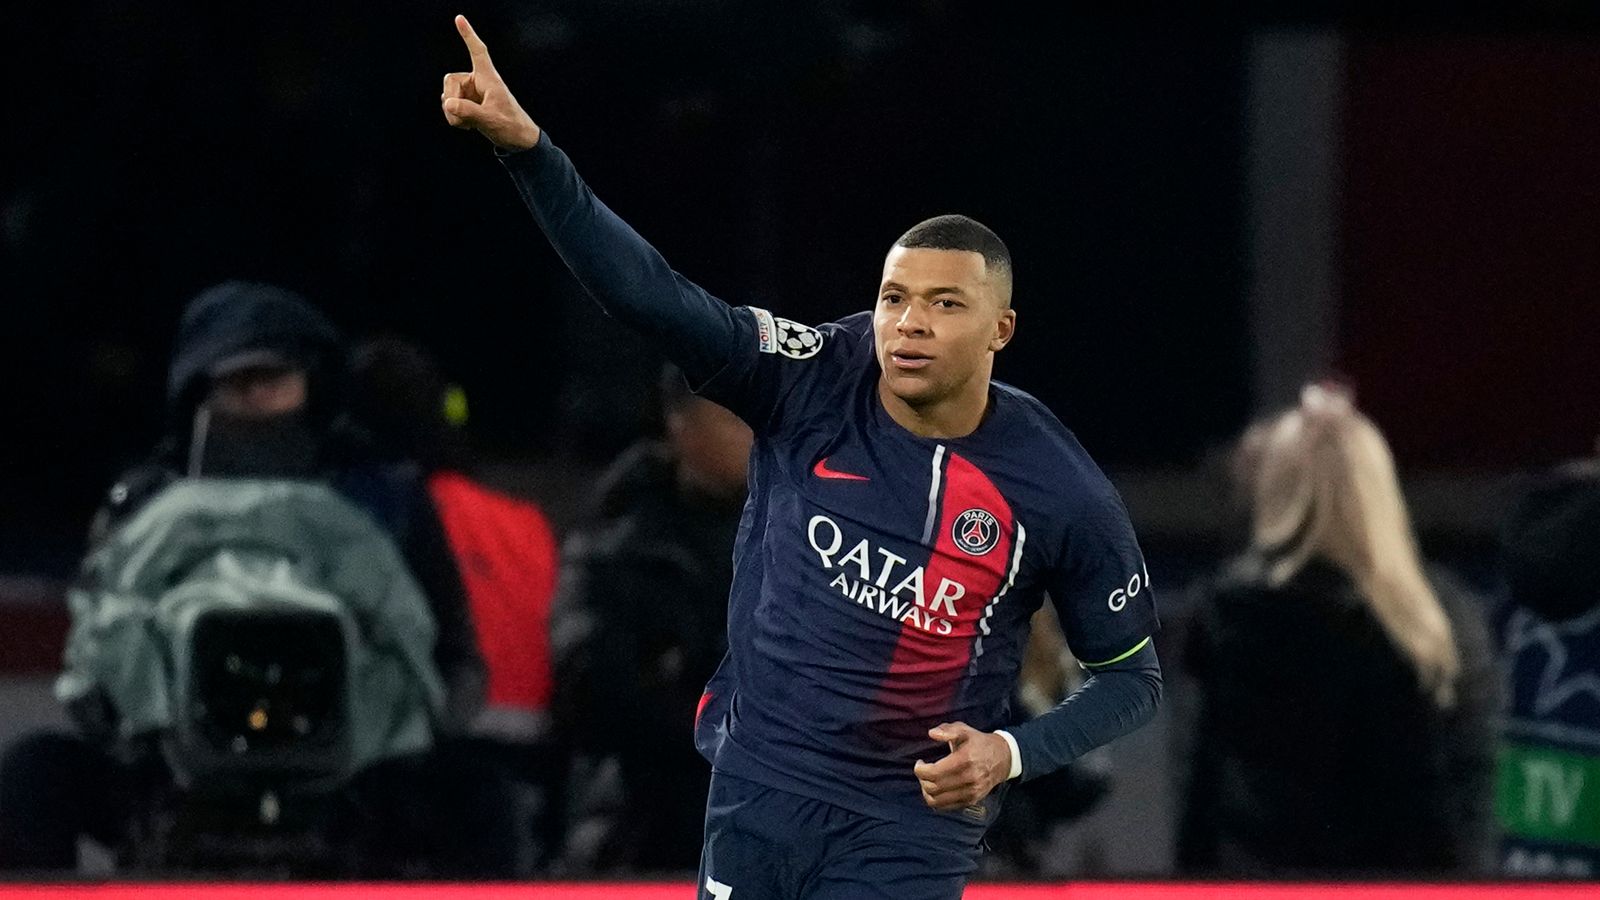 Mbappe To PSG: “I Will Leave At The End Of This Season”